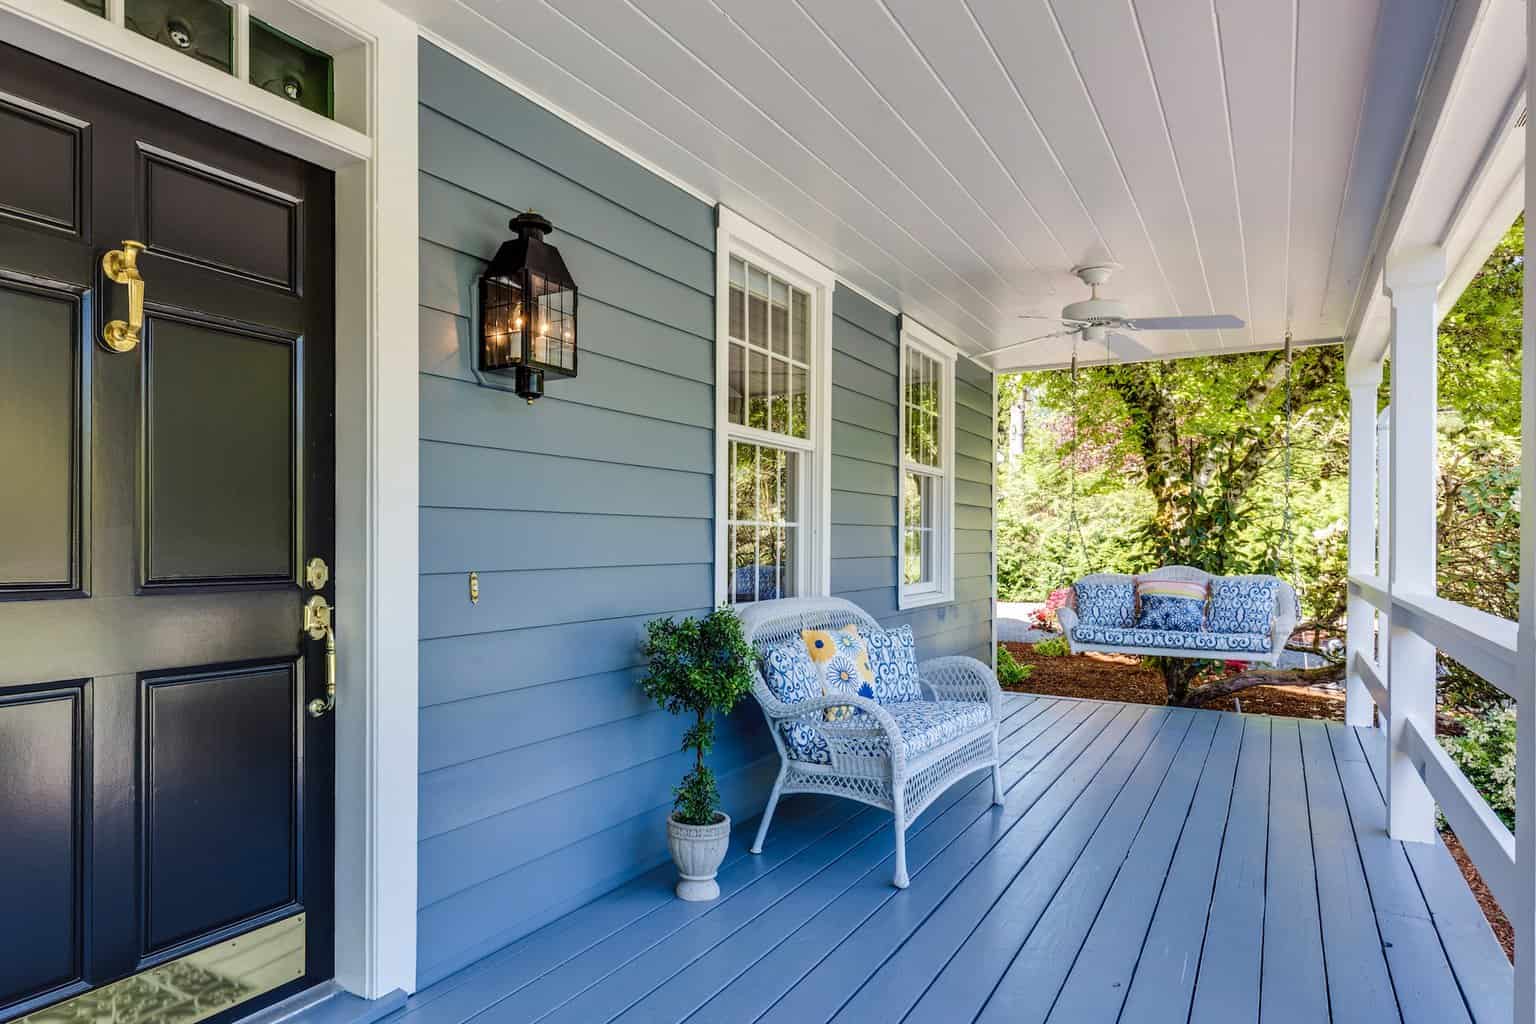 Image shows a front porch on a home with light blue siding and a black door with a white bench